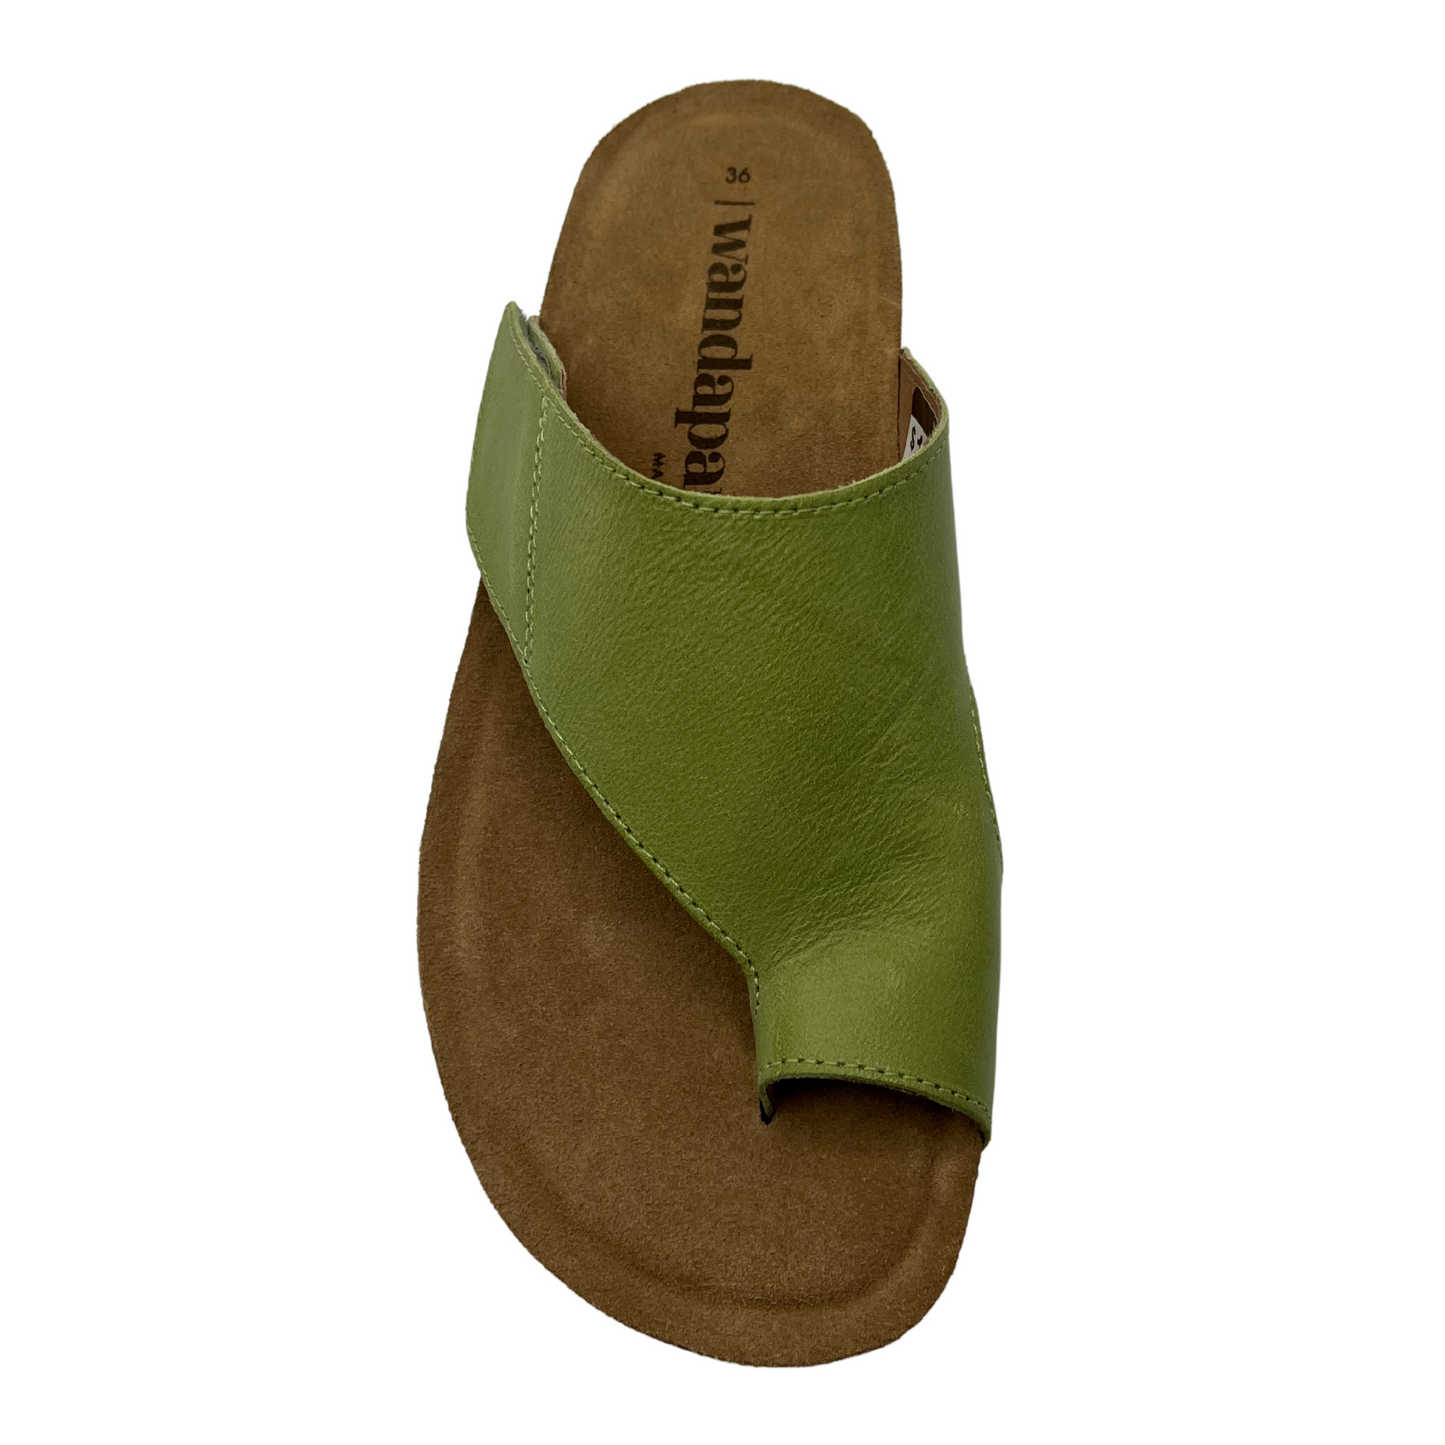 Top view of green leather sandal with cork footbed